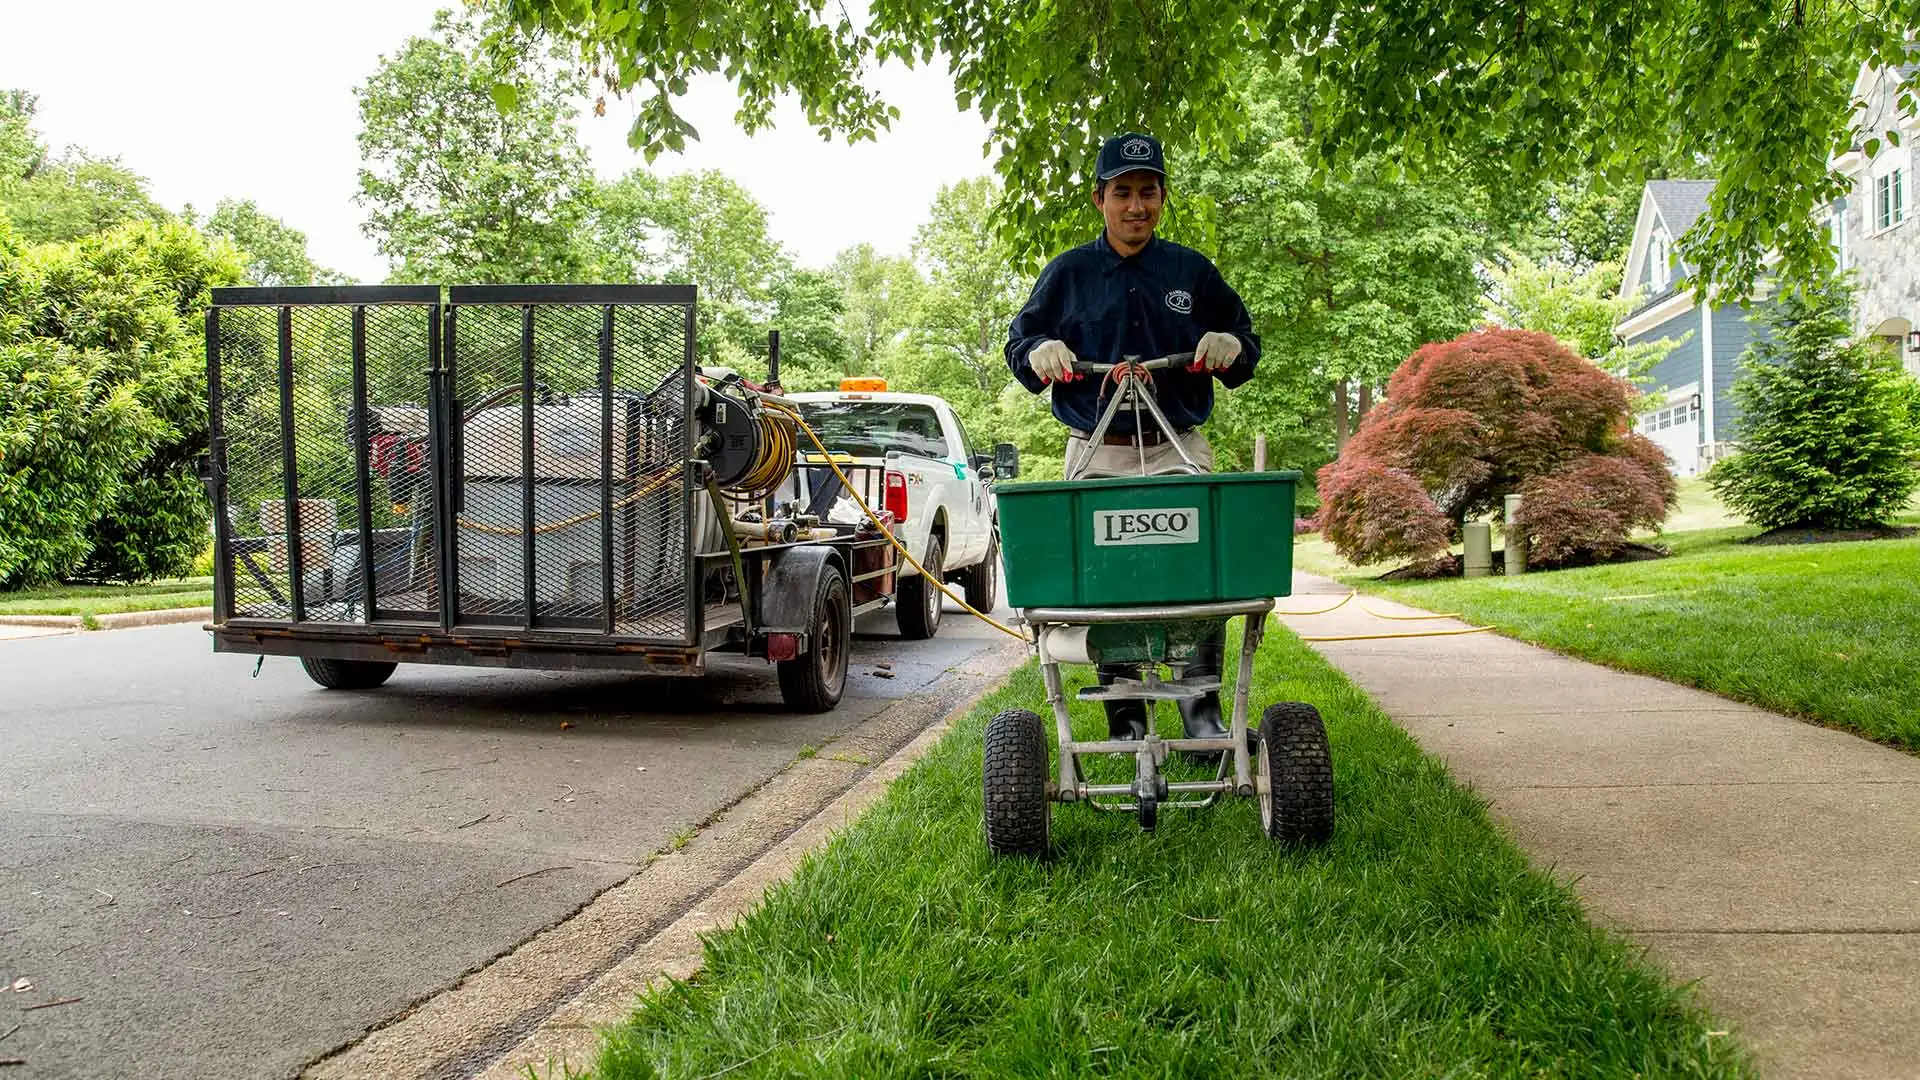 Man fertilizing a lawn with a work trailer and truck parked in the street in the background.